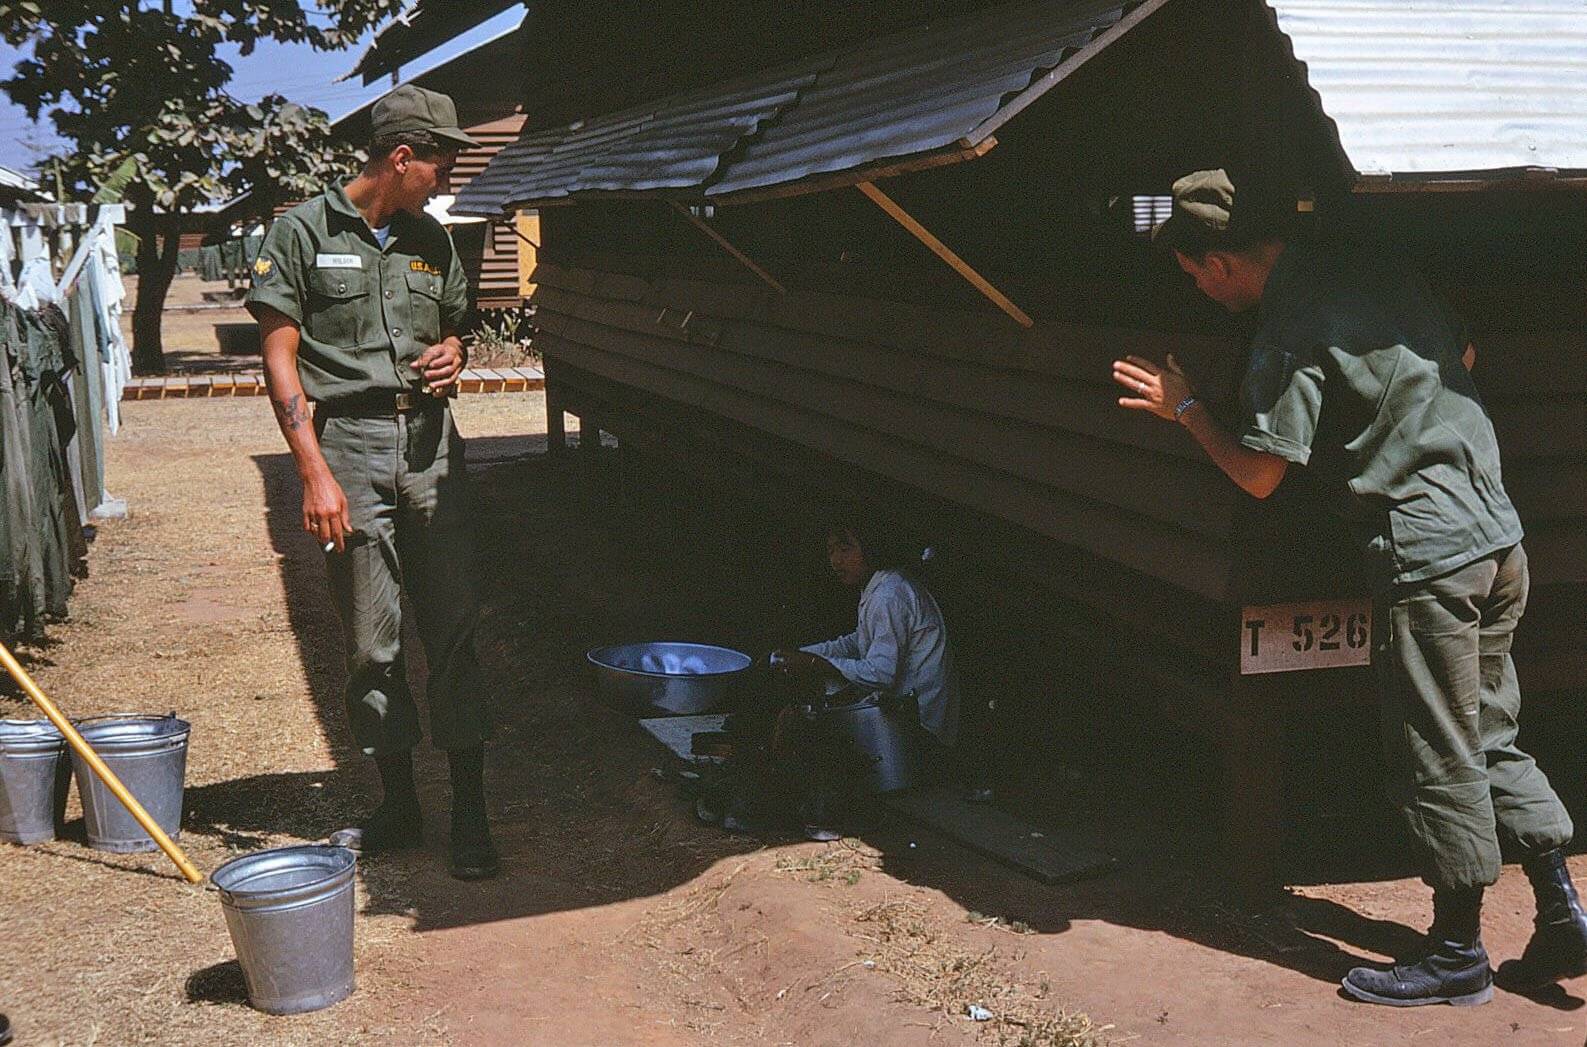 Two US soldiers outside, talking to an Asian woman sitting in the shade, hand washing her laundry.